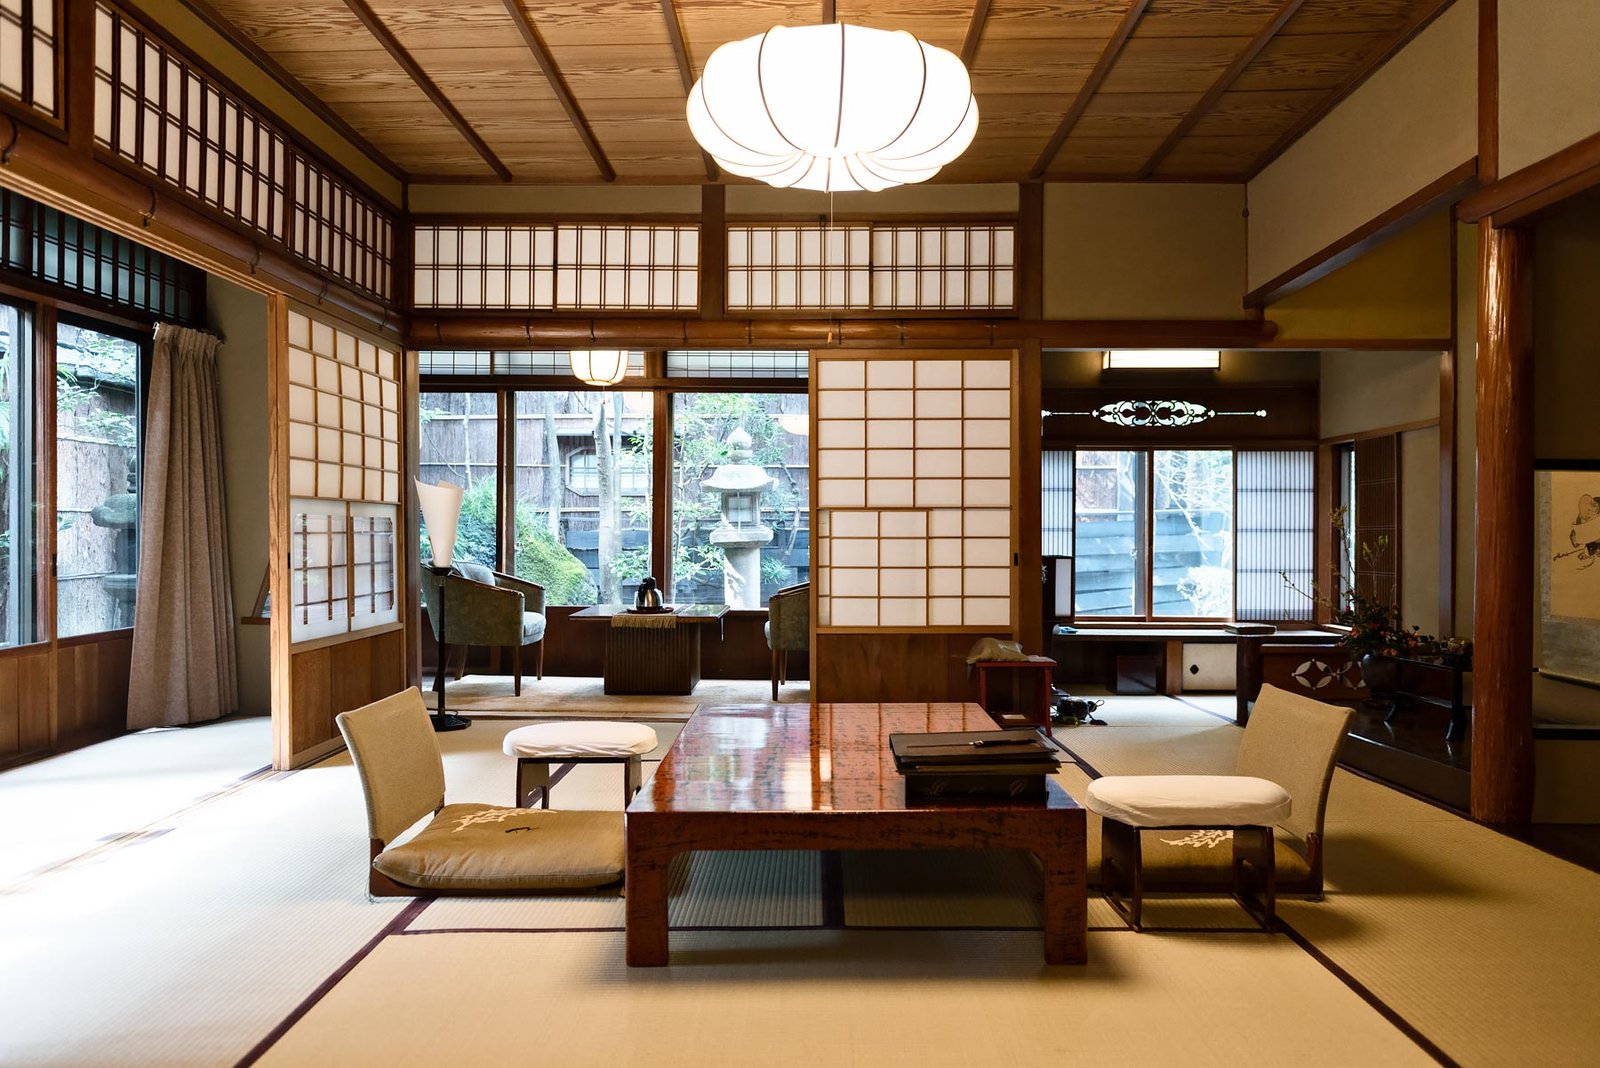 Staying At A Traditional Ryokan In Kyoto The Ultimate Japanese Experience